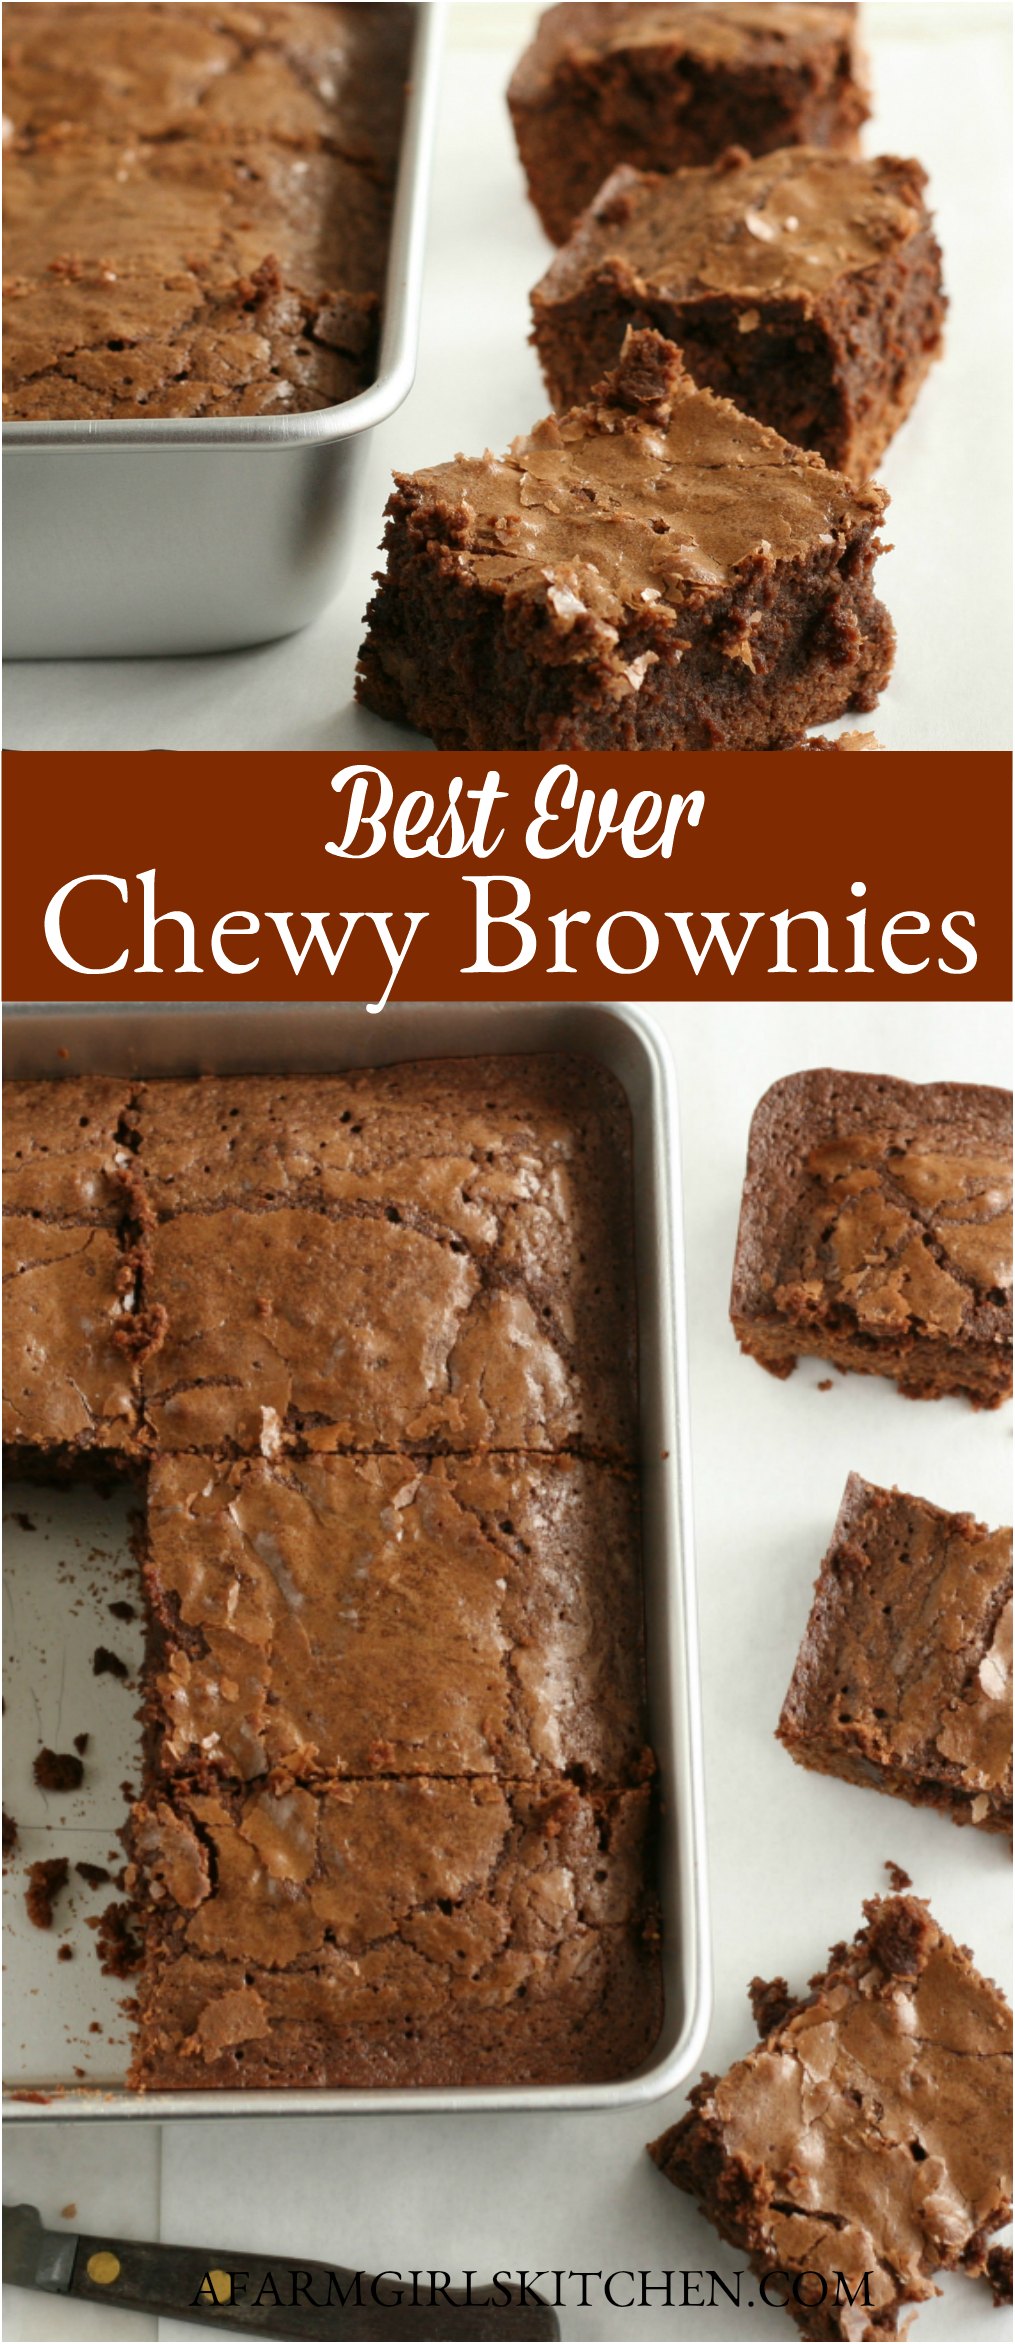 Chewy Brownies Recipe (Made in one bowl!) | A Farmgirl's Kitchen